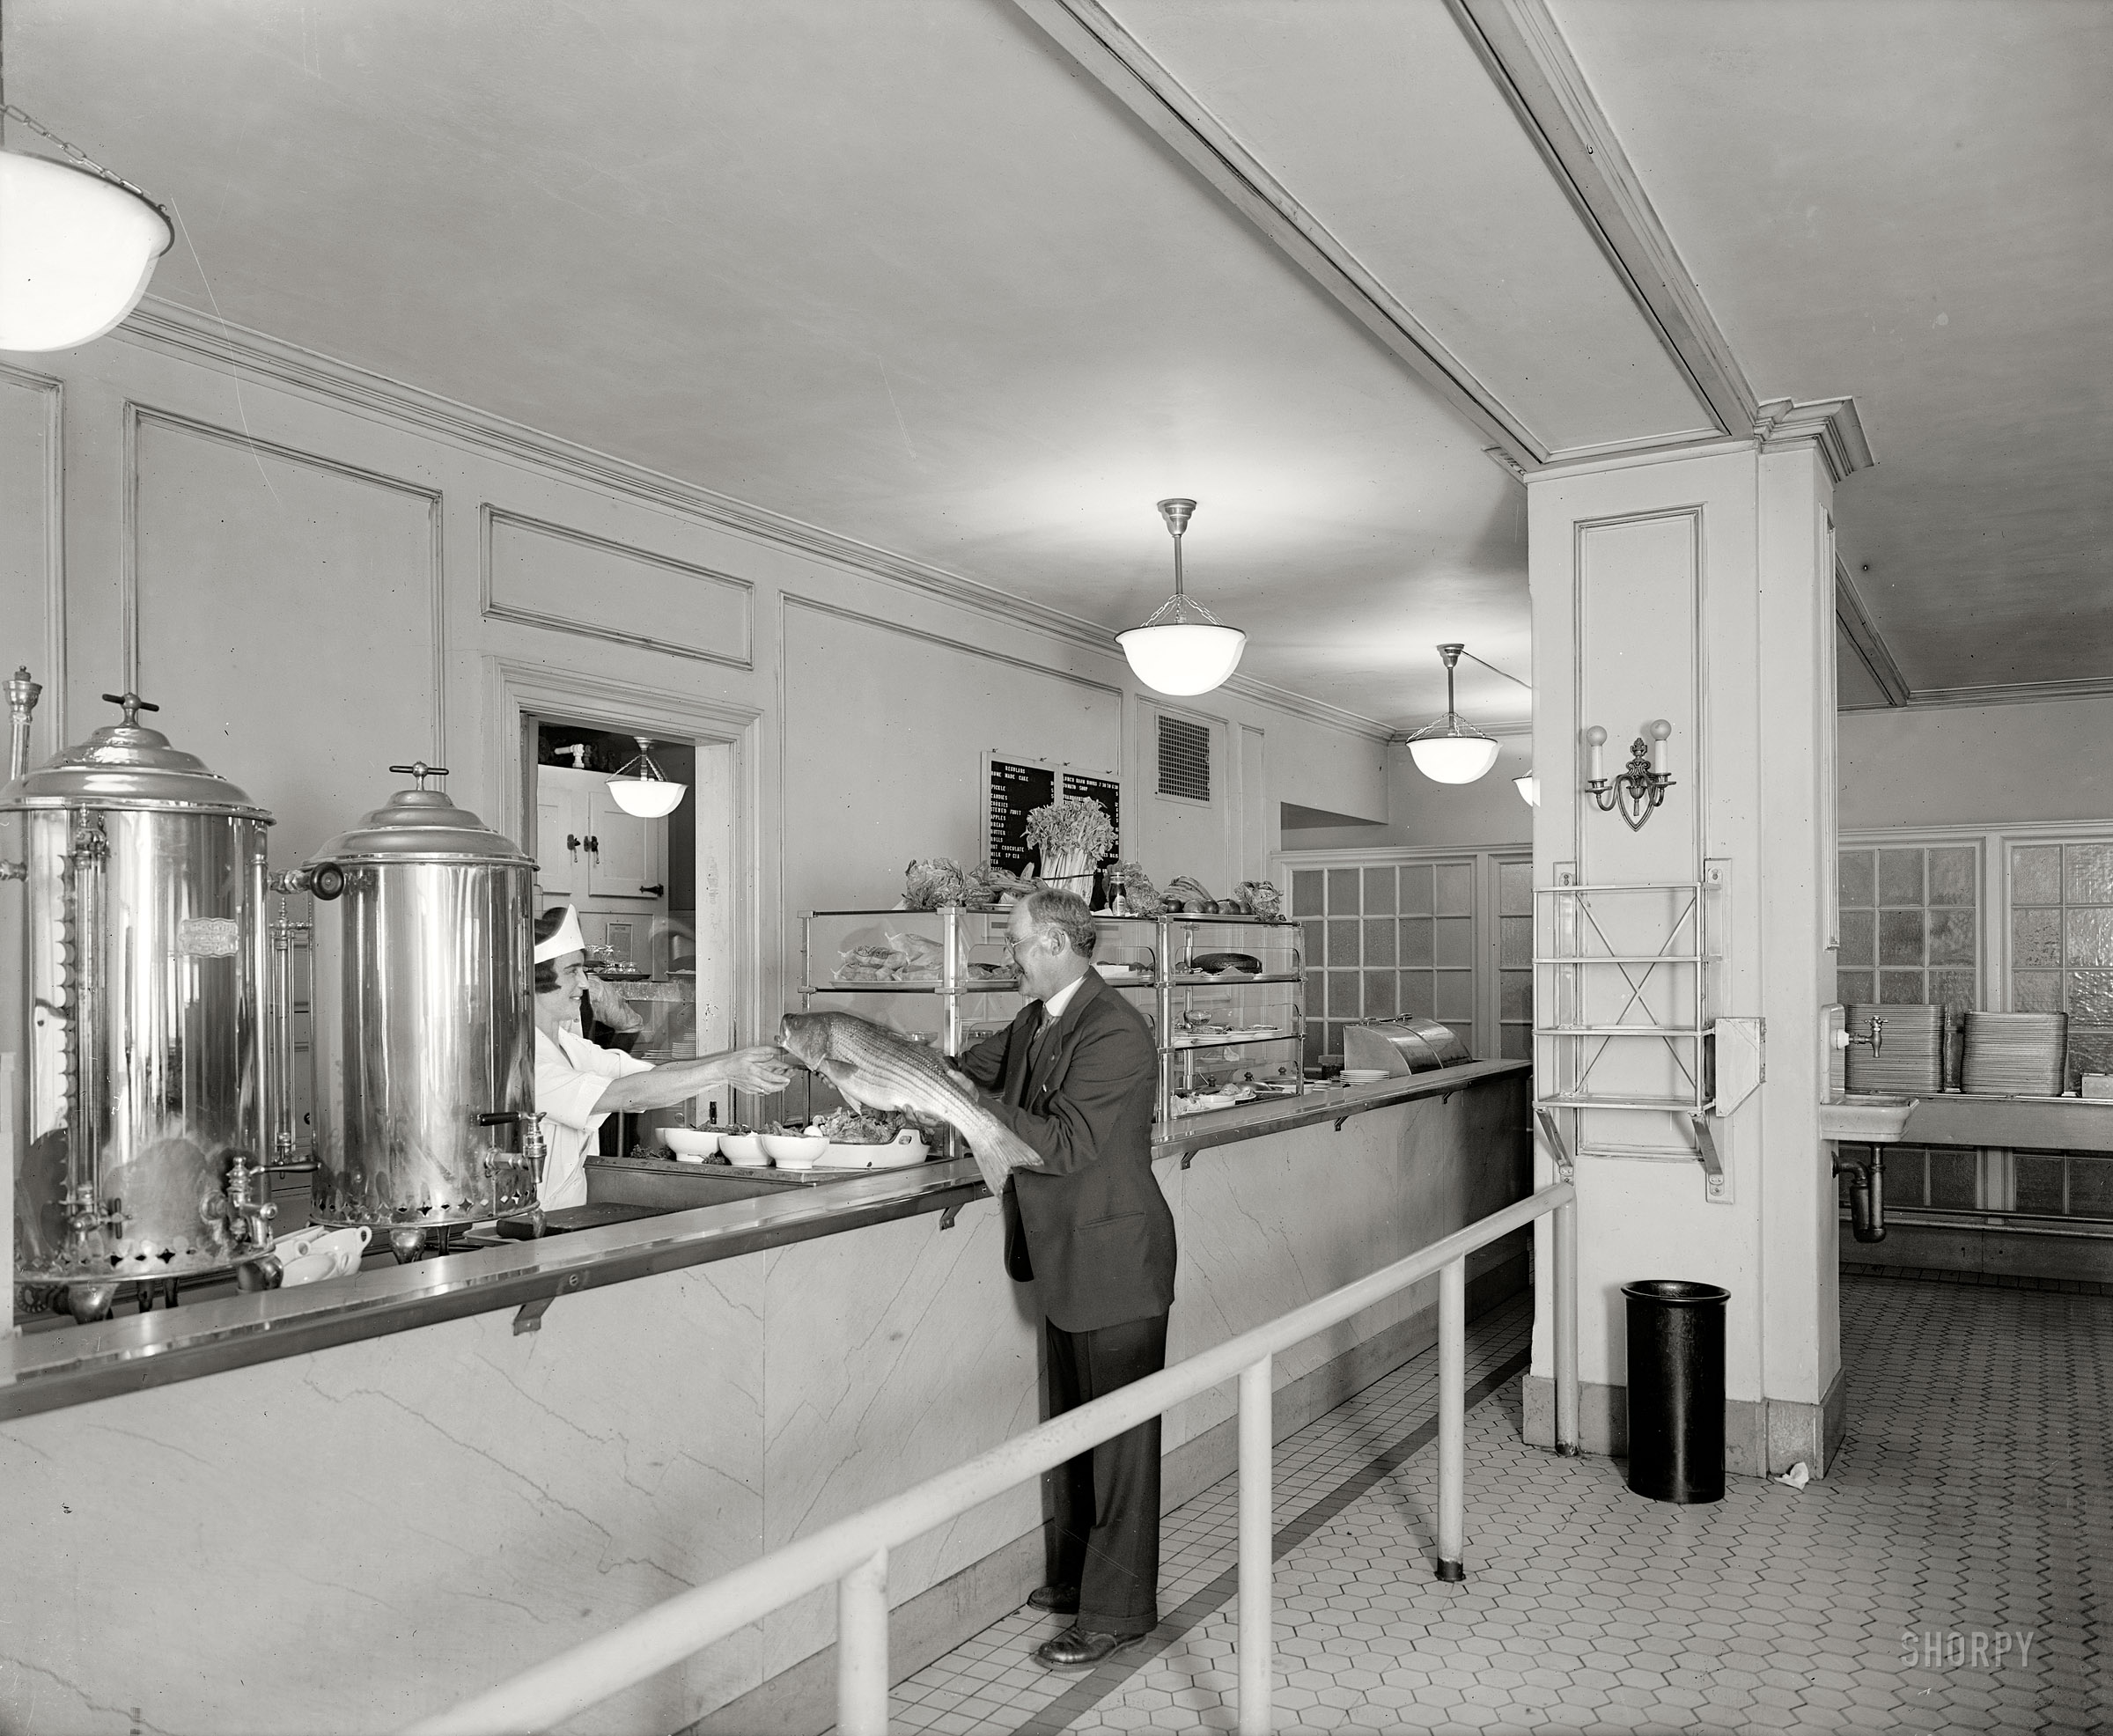 Washington, D.C., circa 1928. "Chesapeake & Potomac Telephone Co. cafeteria showing presentation of rockfish." A caption that raises more questions than it answers. National Photo Company Collection glass negative. View full size.